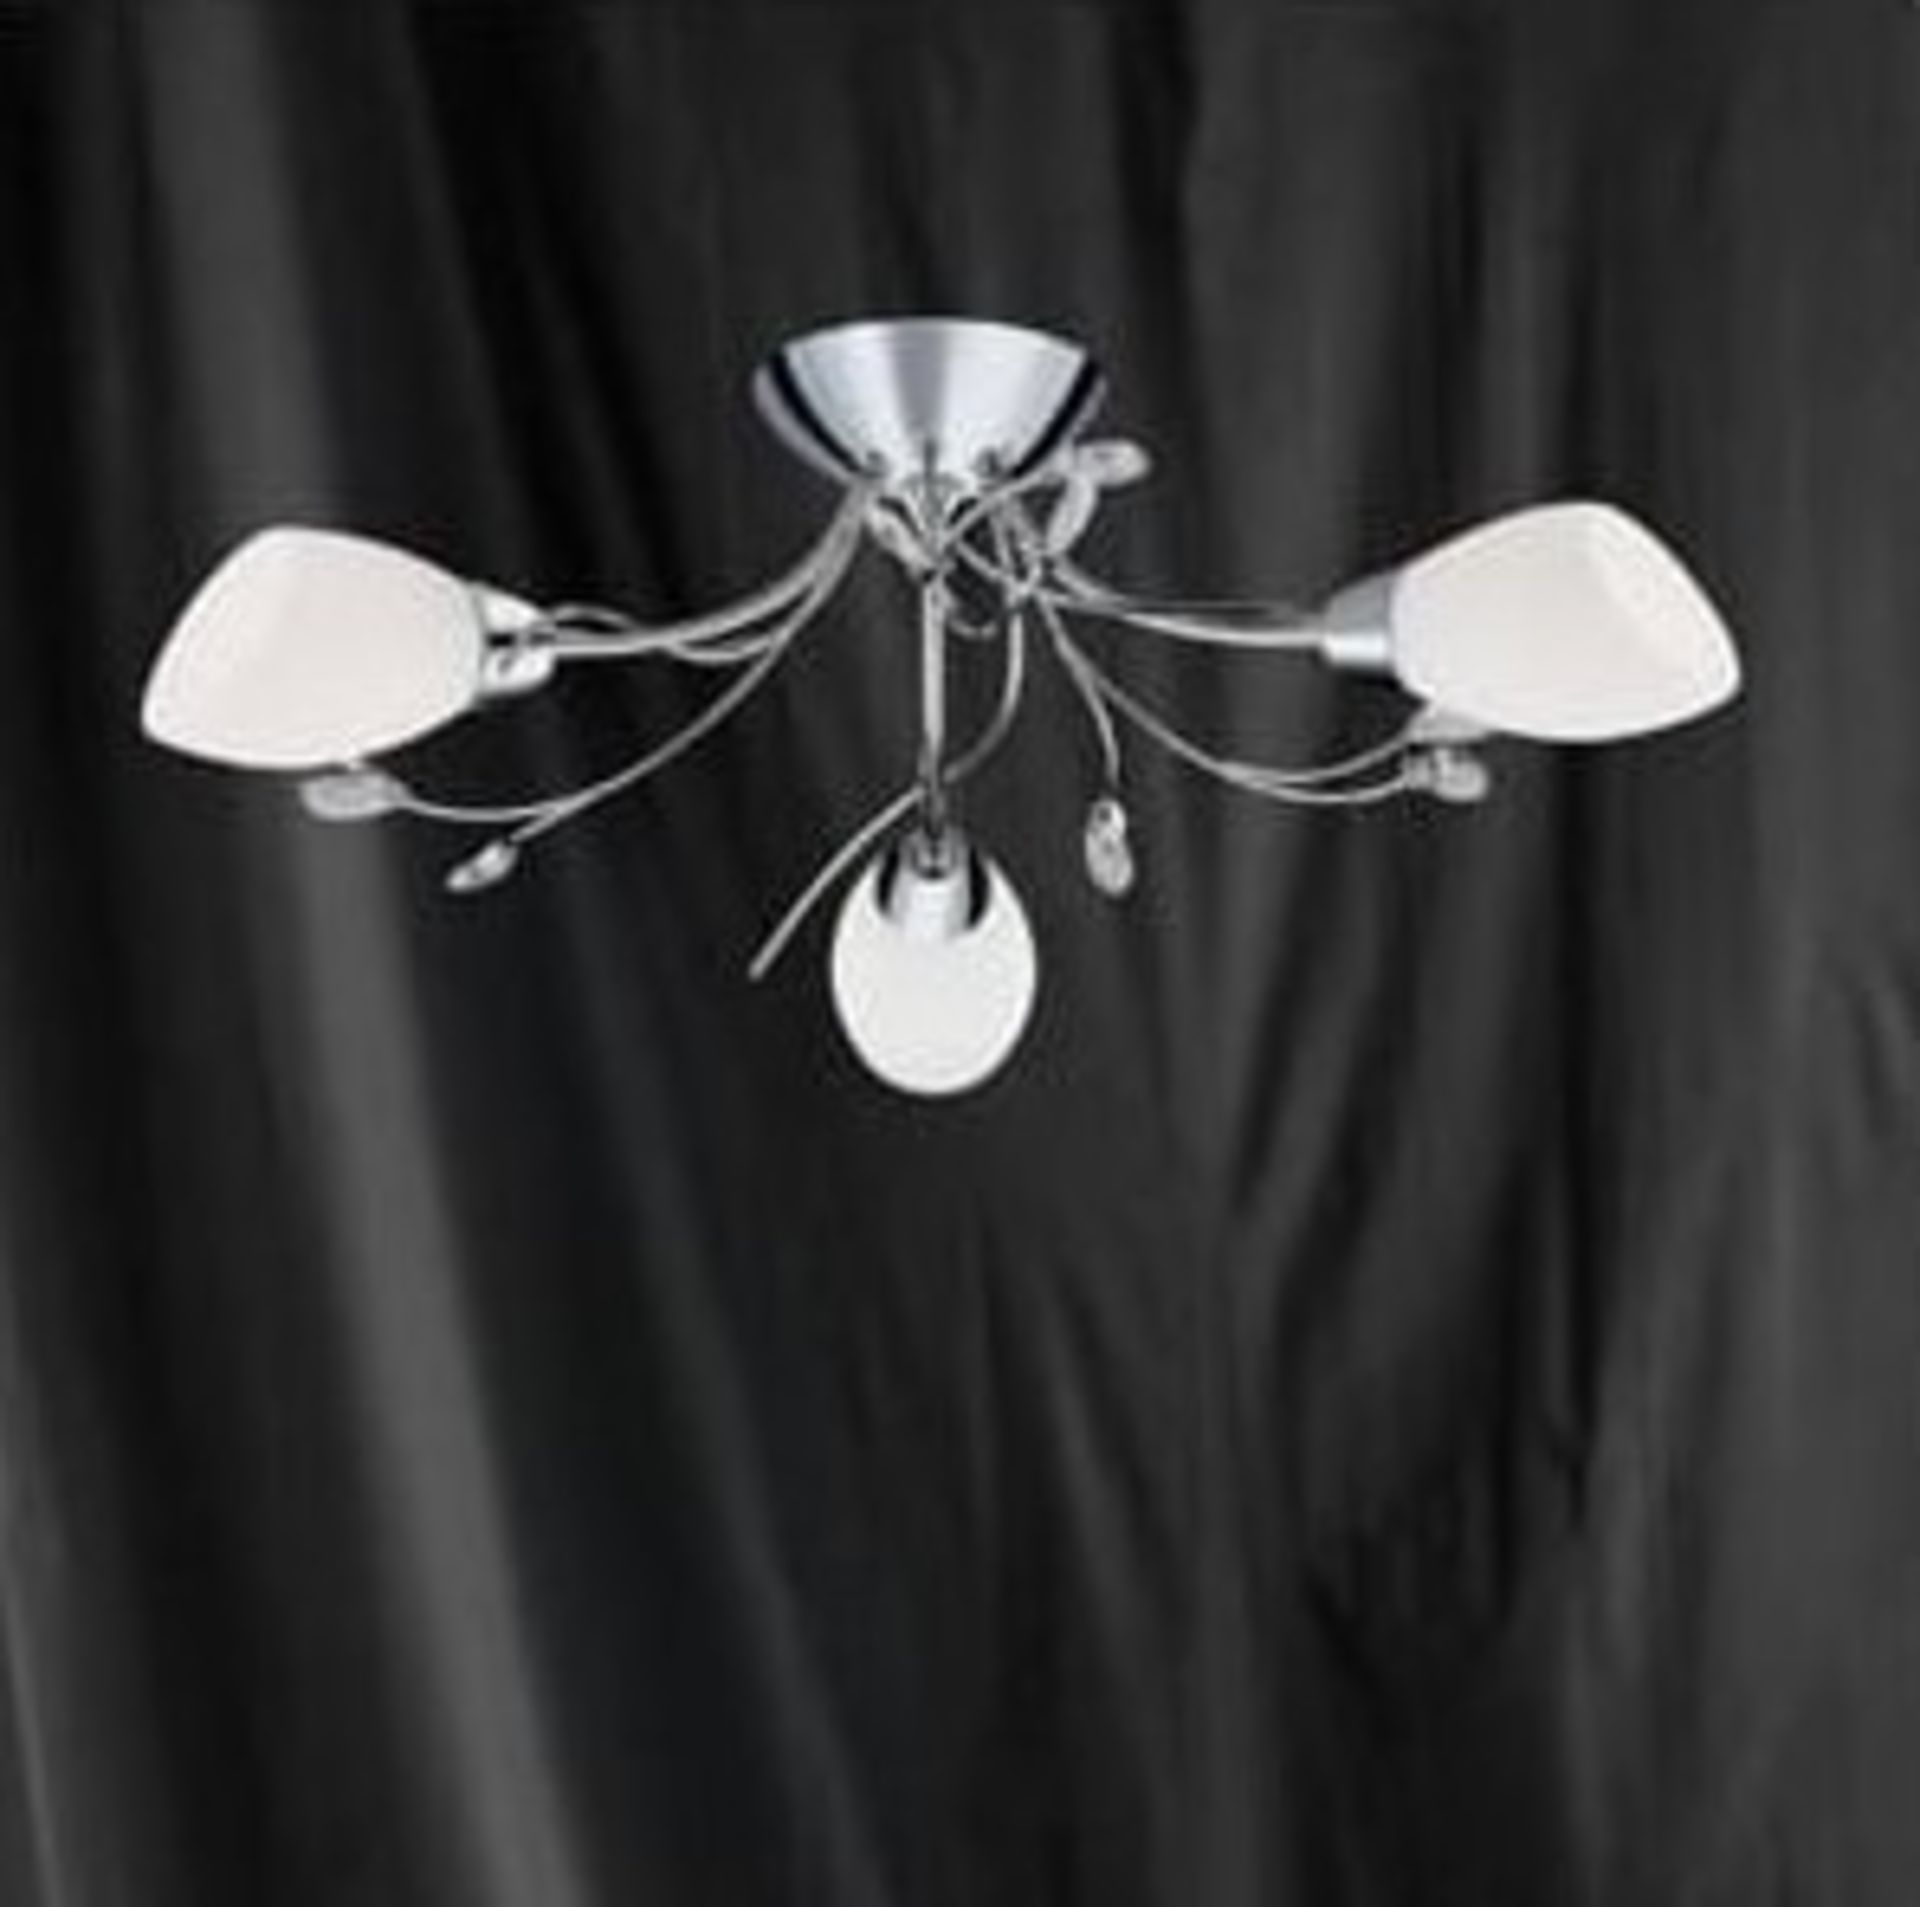 1 x Searchlight Gardenia Semi-flush fitting in chrome - Ref: 1763-3CC -New and boxed- RRP: £112.80 - Image 3 of 3